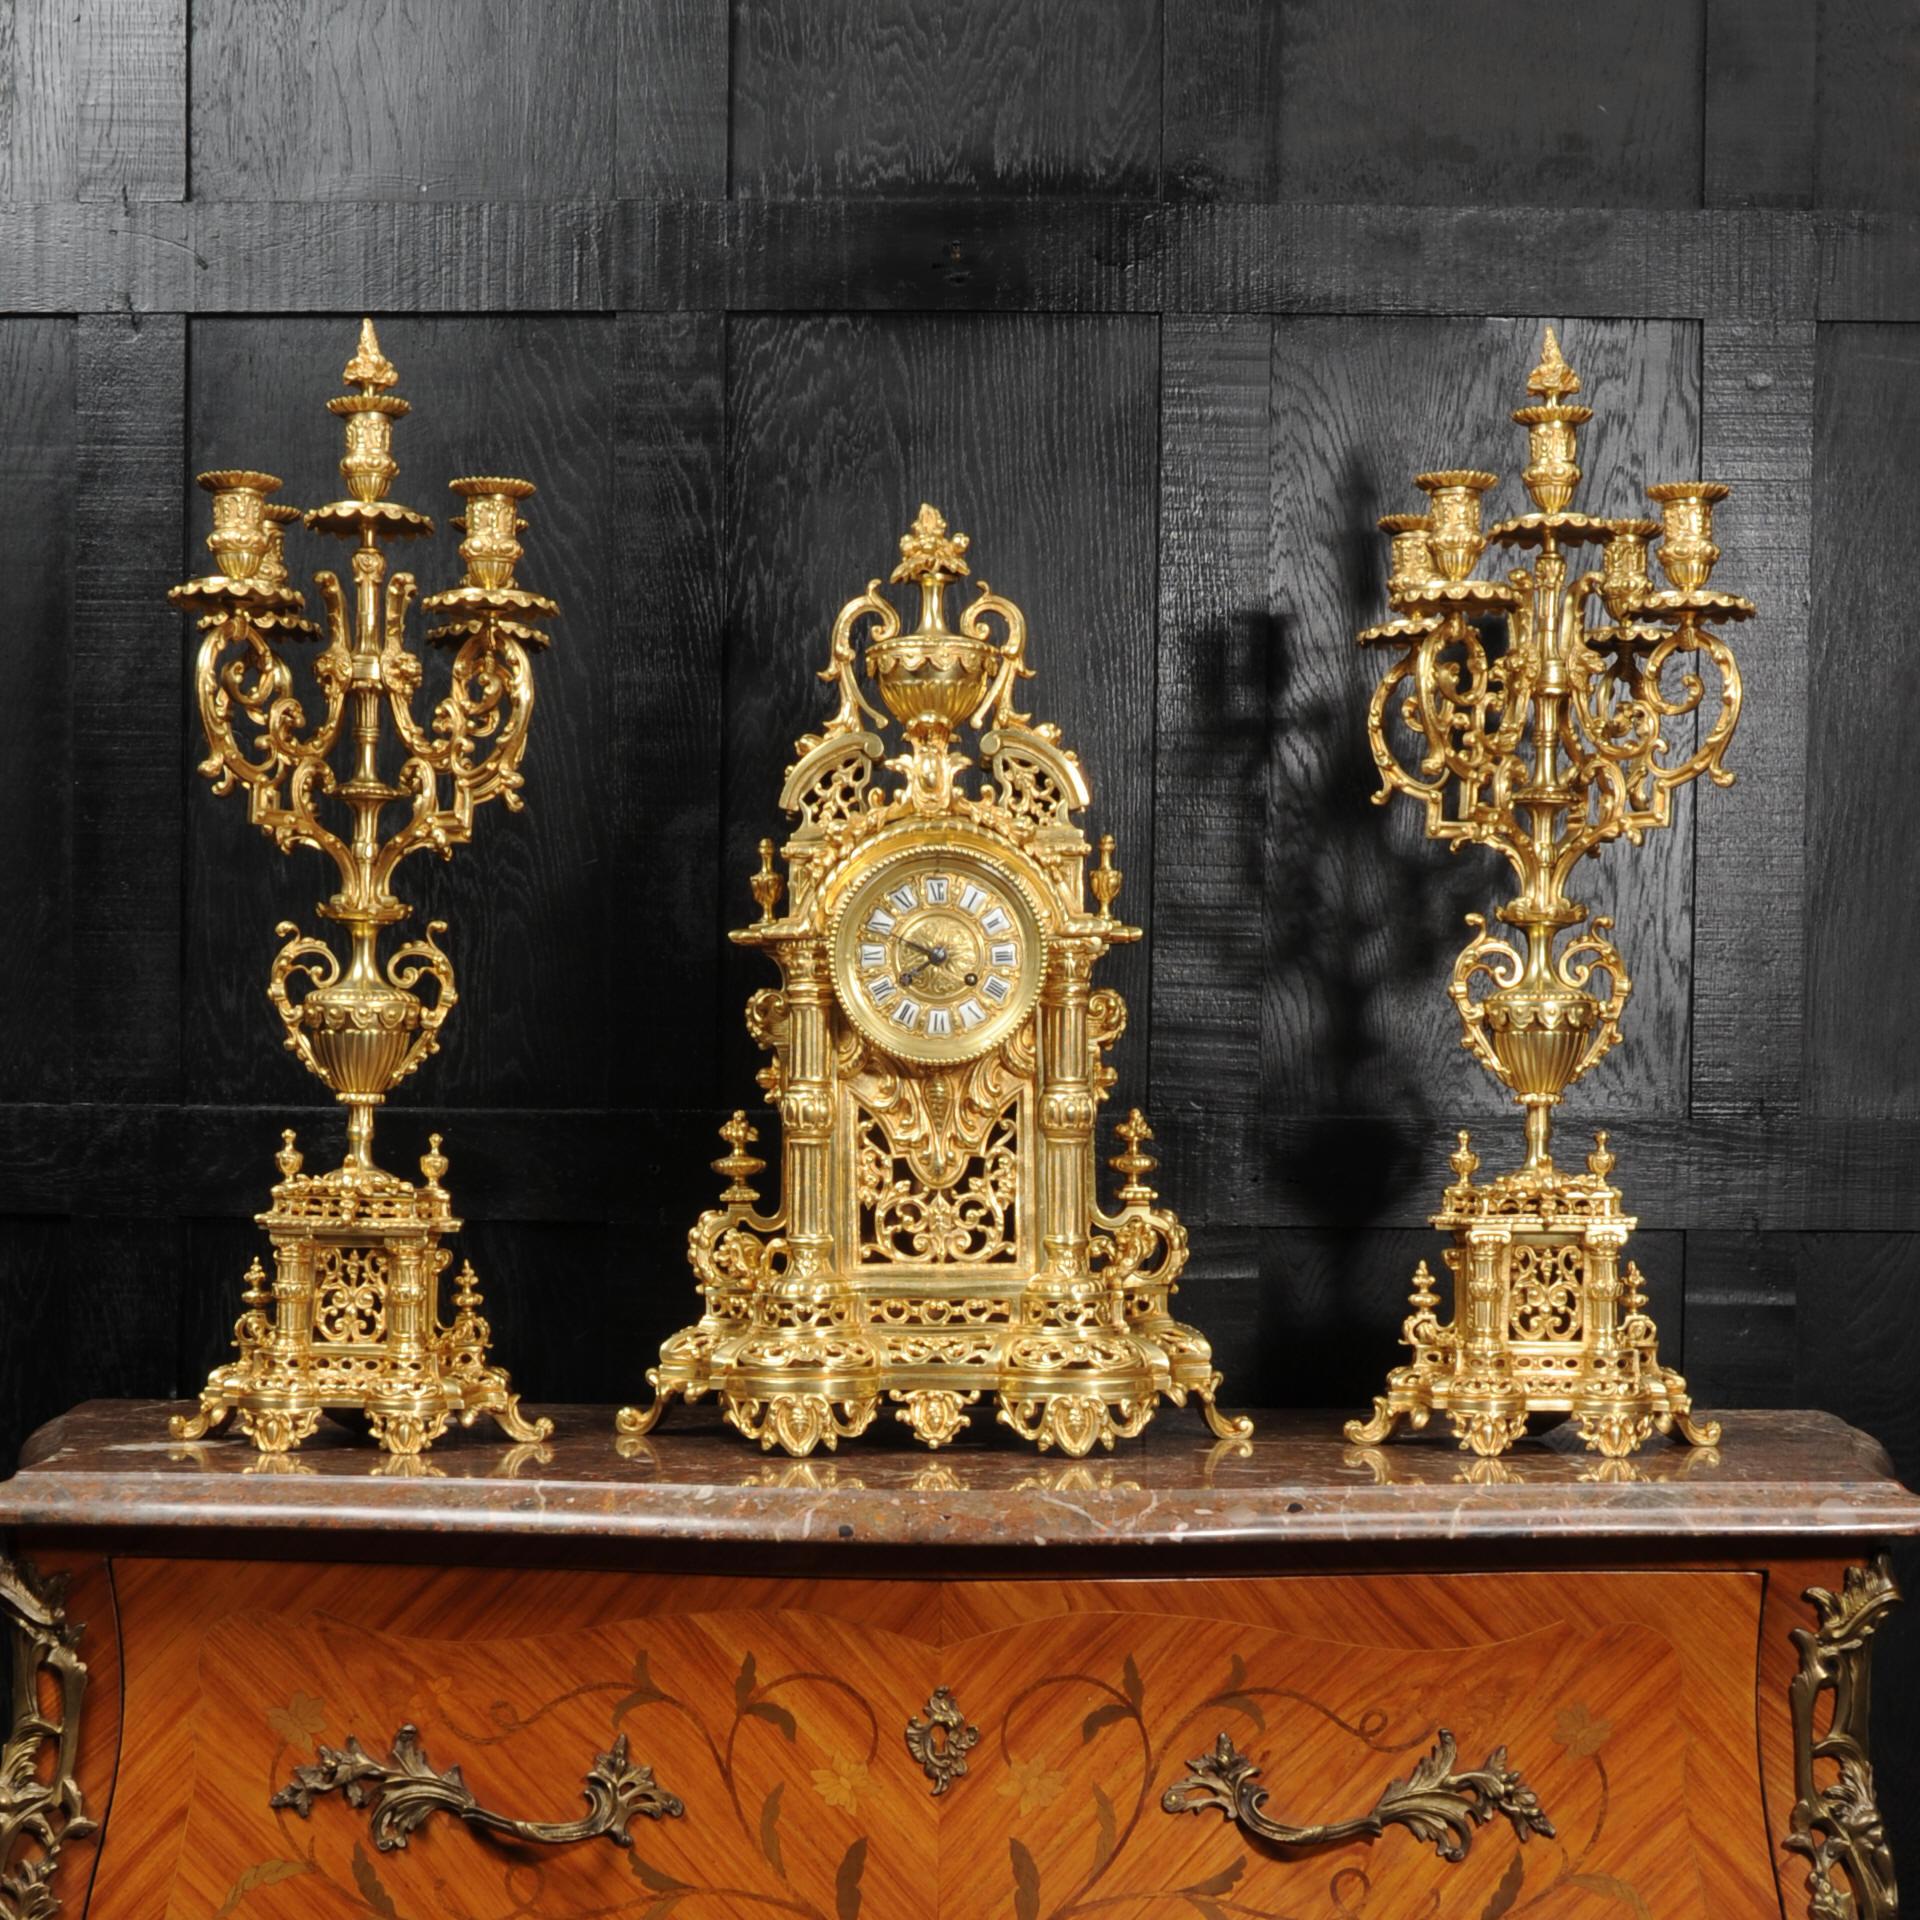 A huge original antique French Baroque clock set dating from circa 1880. Beautifully and substantially modelled, and finished with a lovely original gild. It is of architectural form with a swans neck pediment surmounted by an urn with an final of